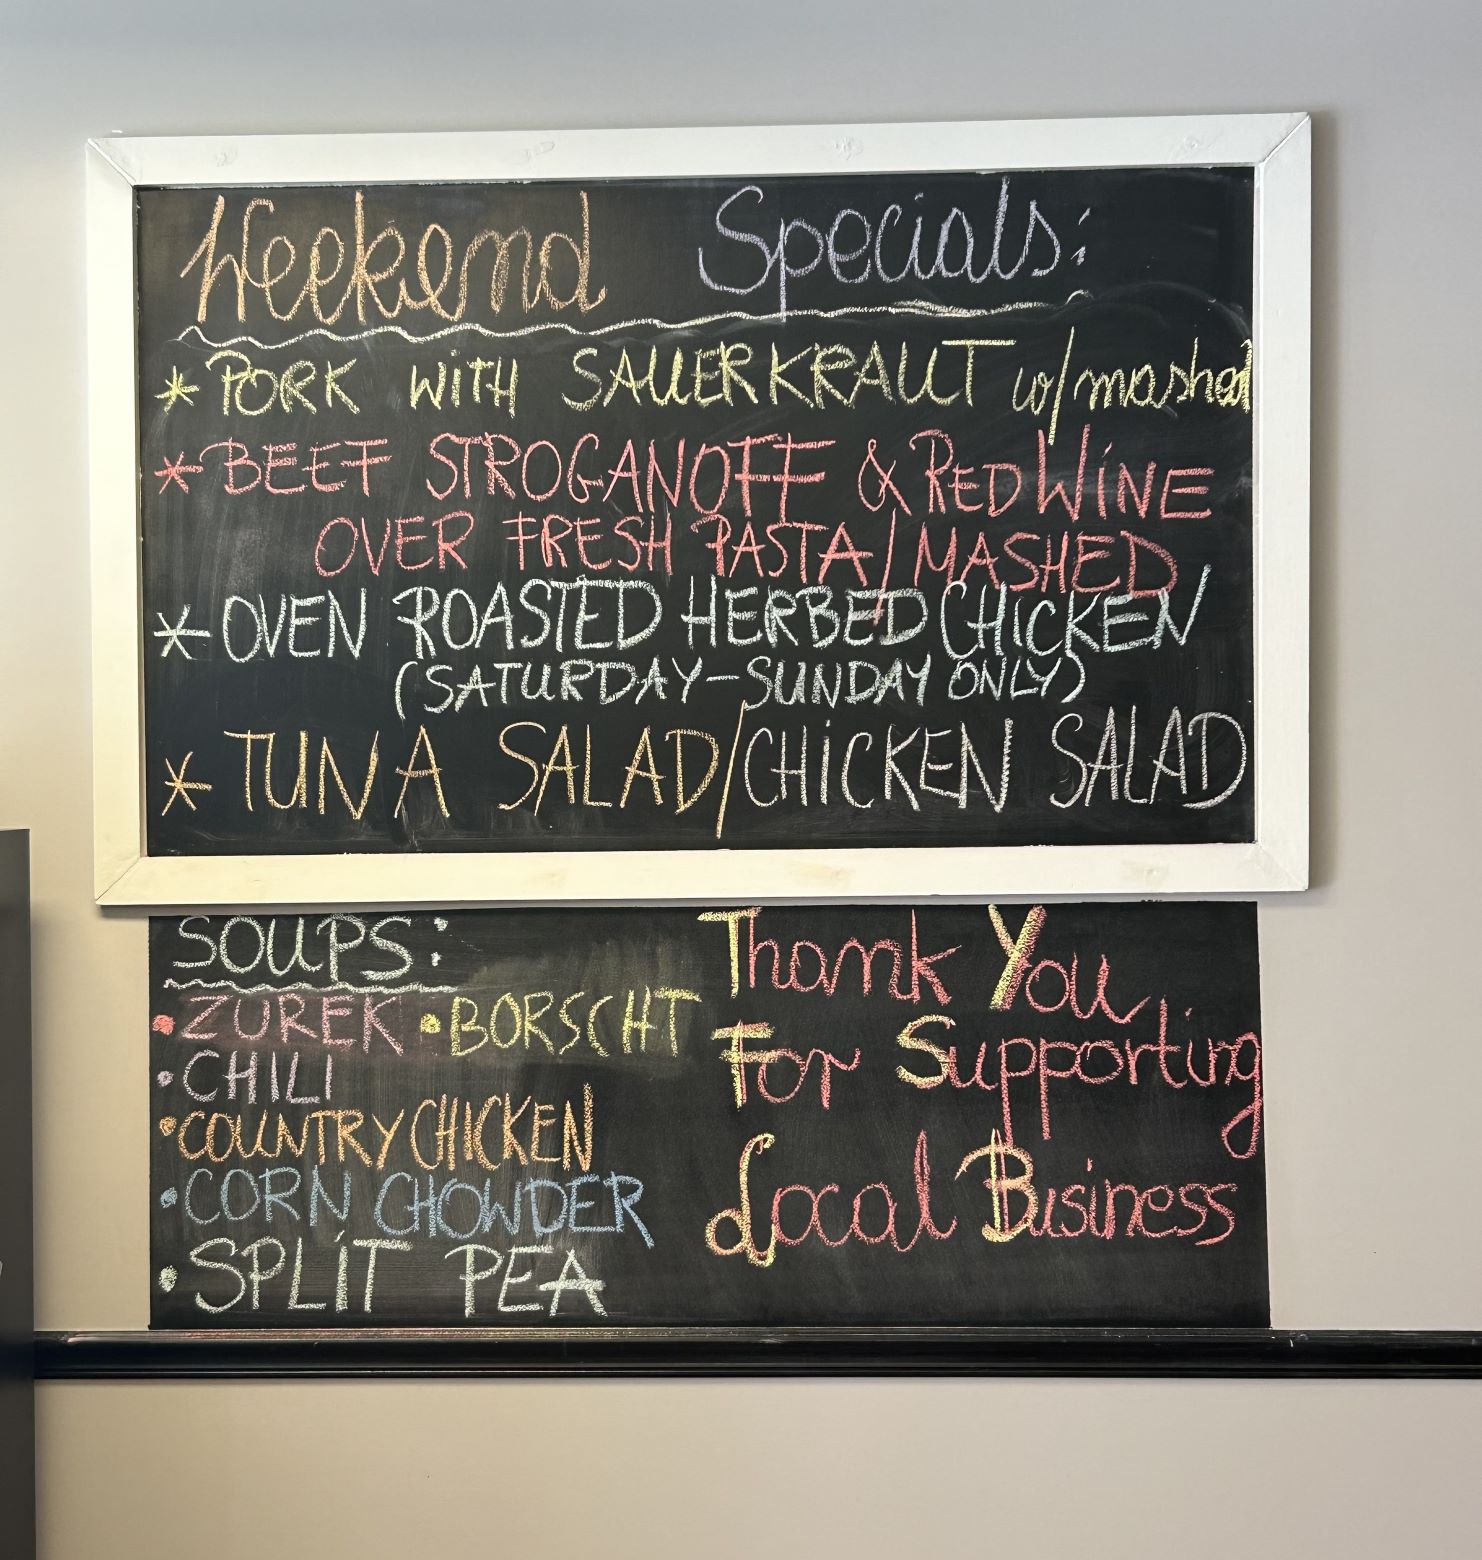 Check the Chalkboard - 1st weekend of June 2024 - Weekend Specials such as Pork Sauerkraut, Beef Stroganoff, Oven Roasted Chicken, and Several Homemade Soups at Kat's Cafe in Minersville.